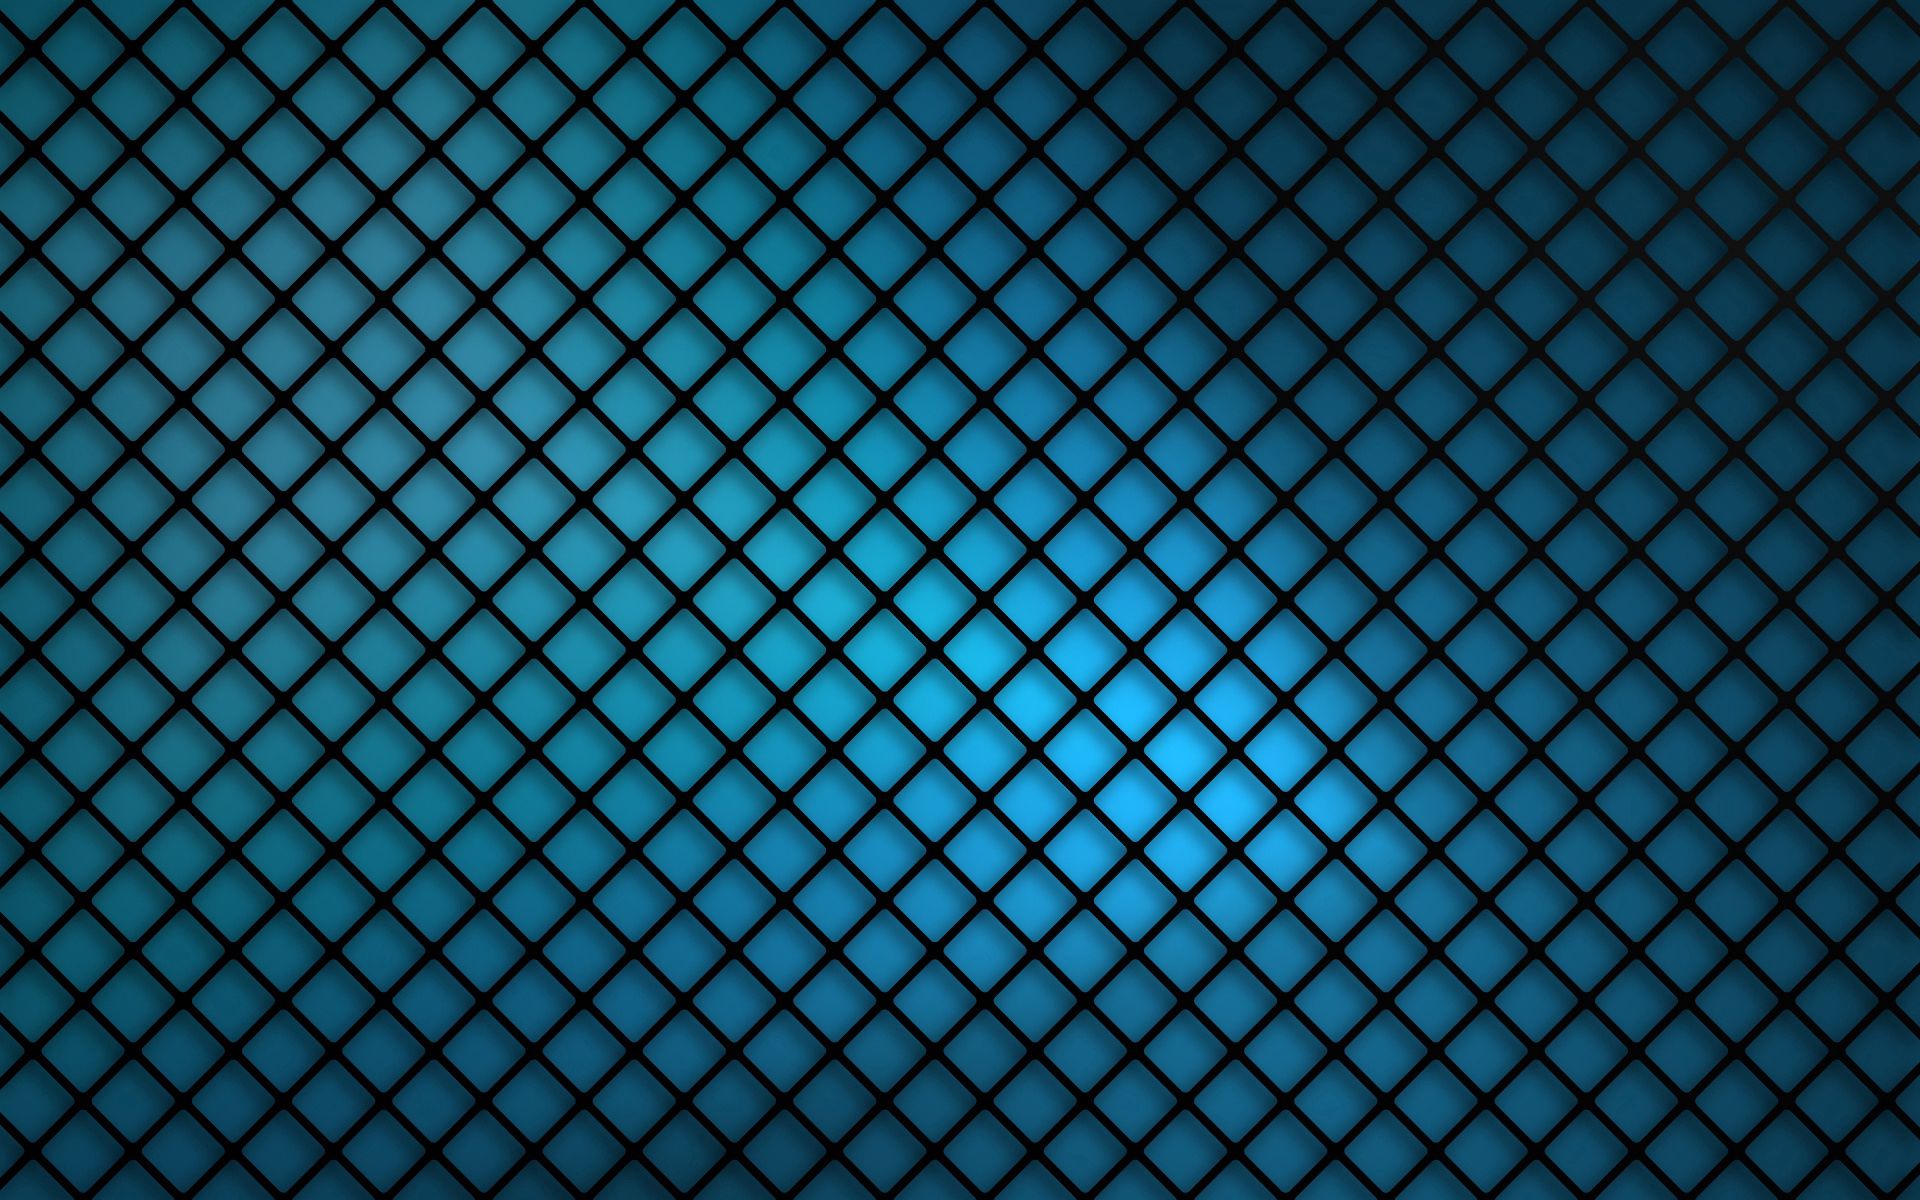 grid, texture, textures, background, dark, shine, light, surface cell phone wallpapers